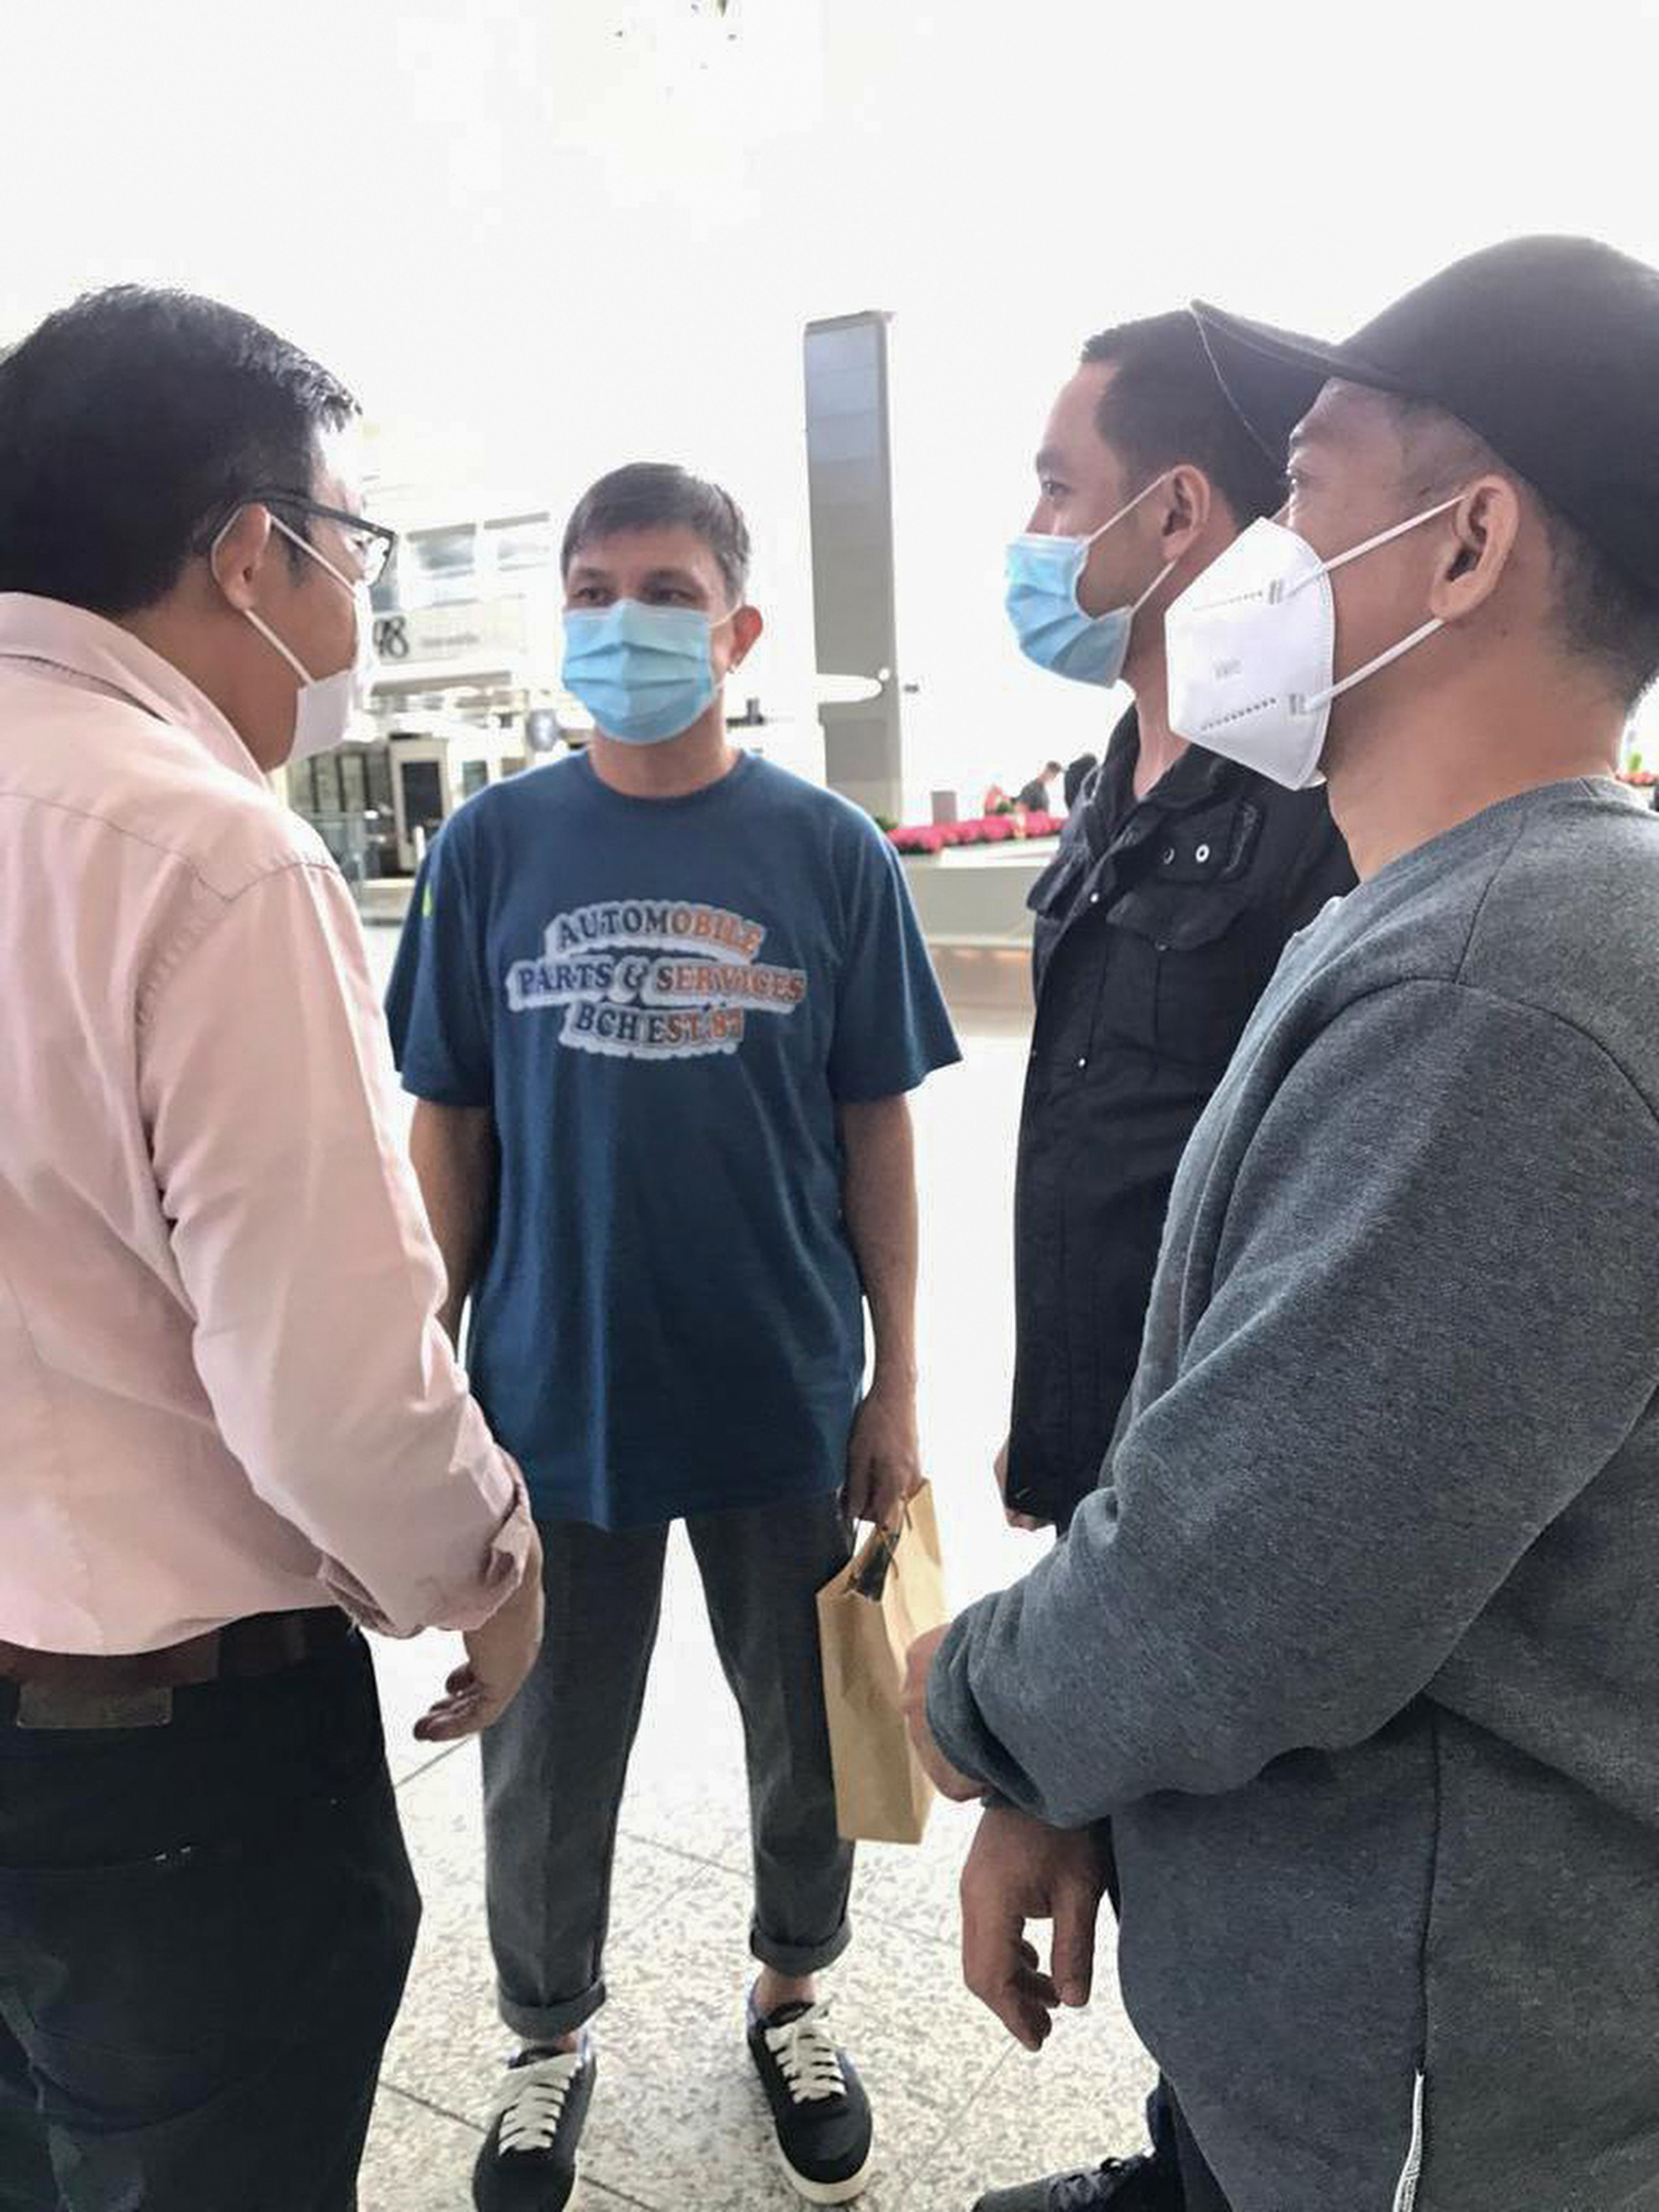 (L to R) Former lawmaker James To, who fought to free four men jailed in the Philippines on drug charges, greets three of them,  Kwok Kam-wah , Chan Kwok-tung and Lo Wing-fai, at the airport on Friday after they were released in the wake of successful appeals. Leung Shu-Fook, whose appeal was unsuccessful, is still in prison. Photo: Handout 